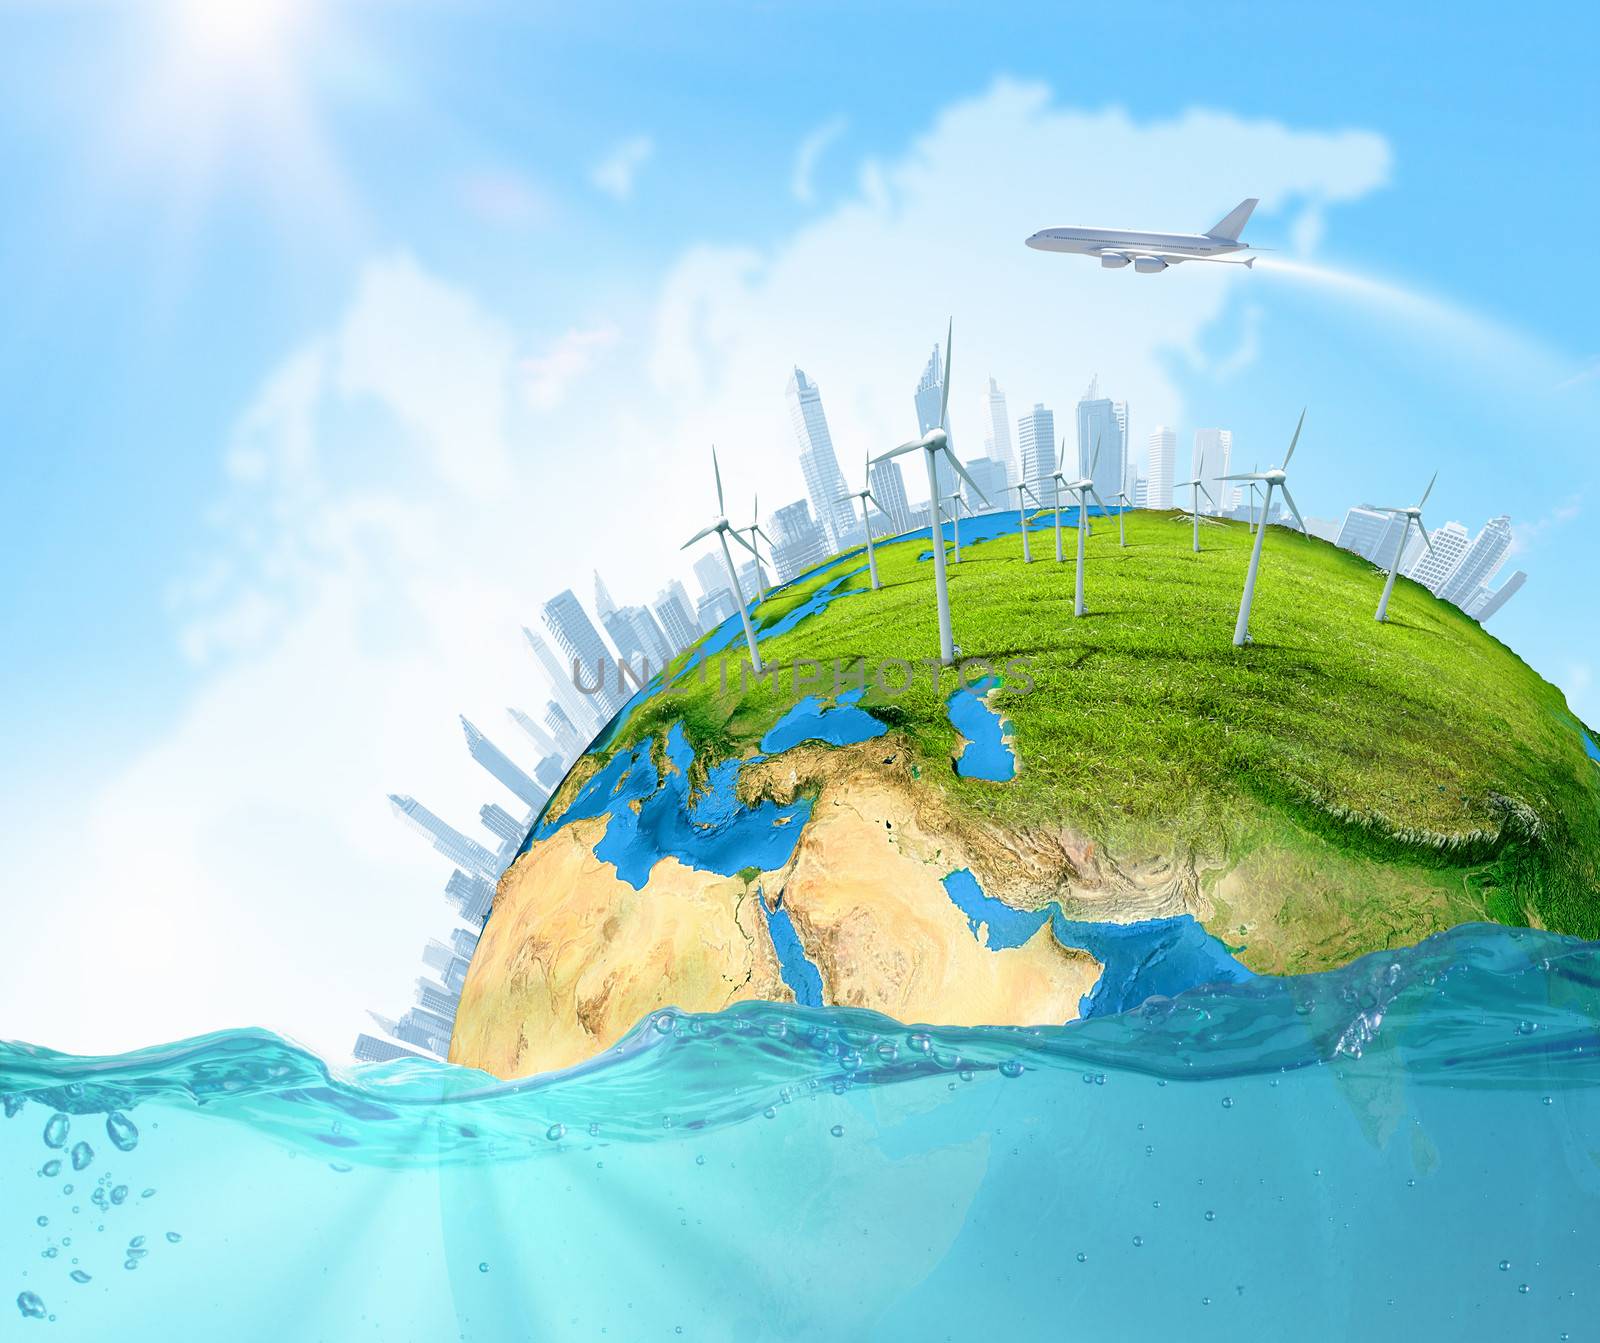 City on island floating in water. Global warming. Elements of this image are furnished by NASA